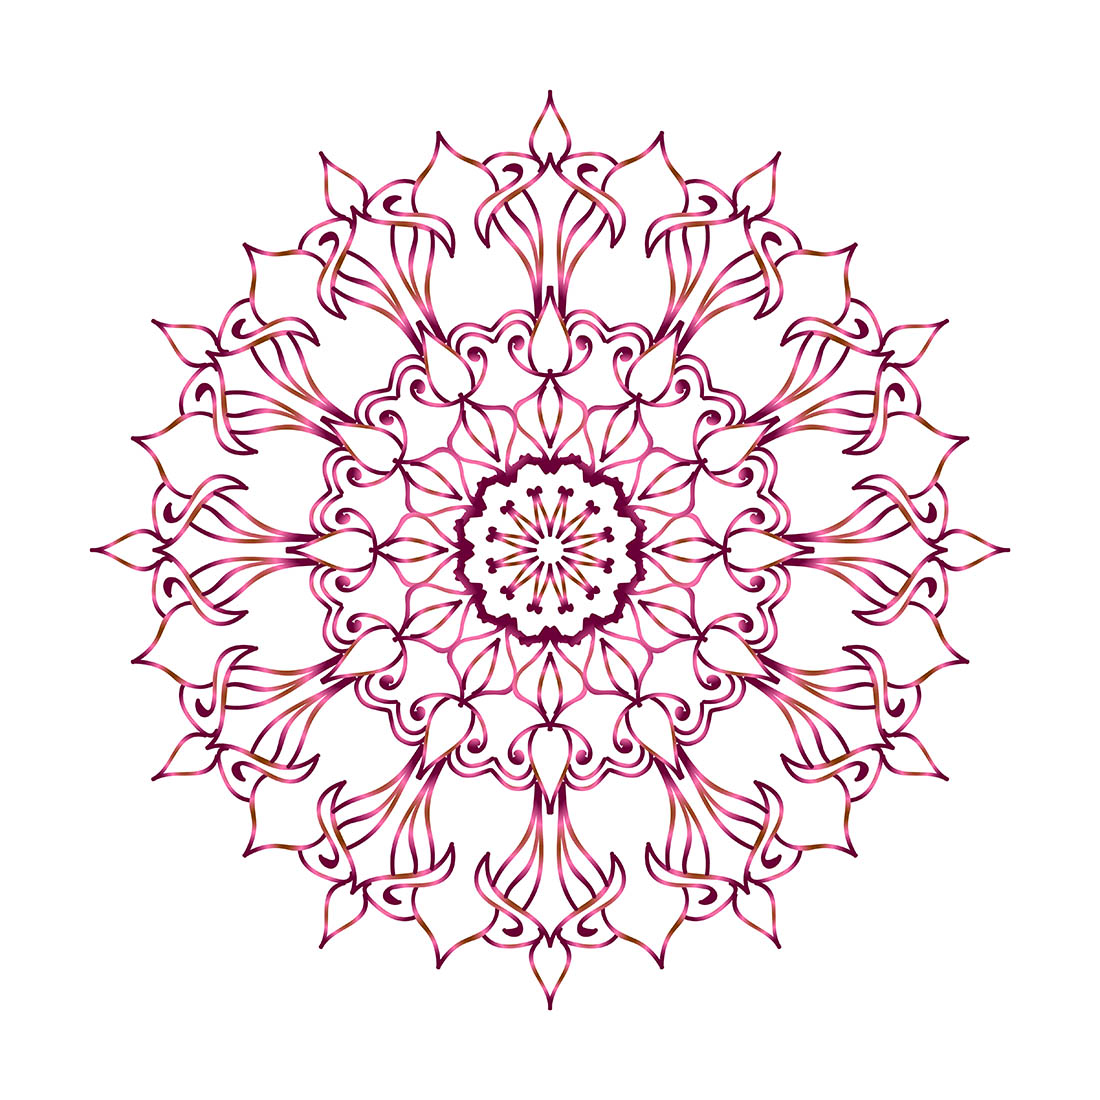 Meditation Mandala On Islamic Circles Vintage Flowers Abstract Unique Pattern With Wedding Card Background Design png classic images preview image.